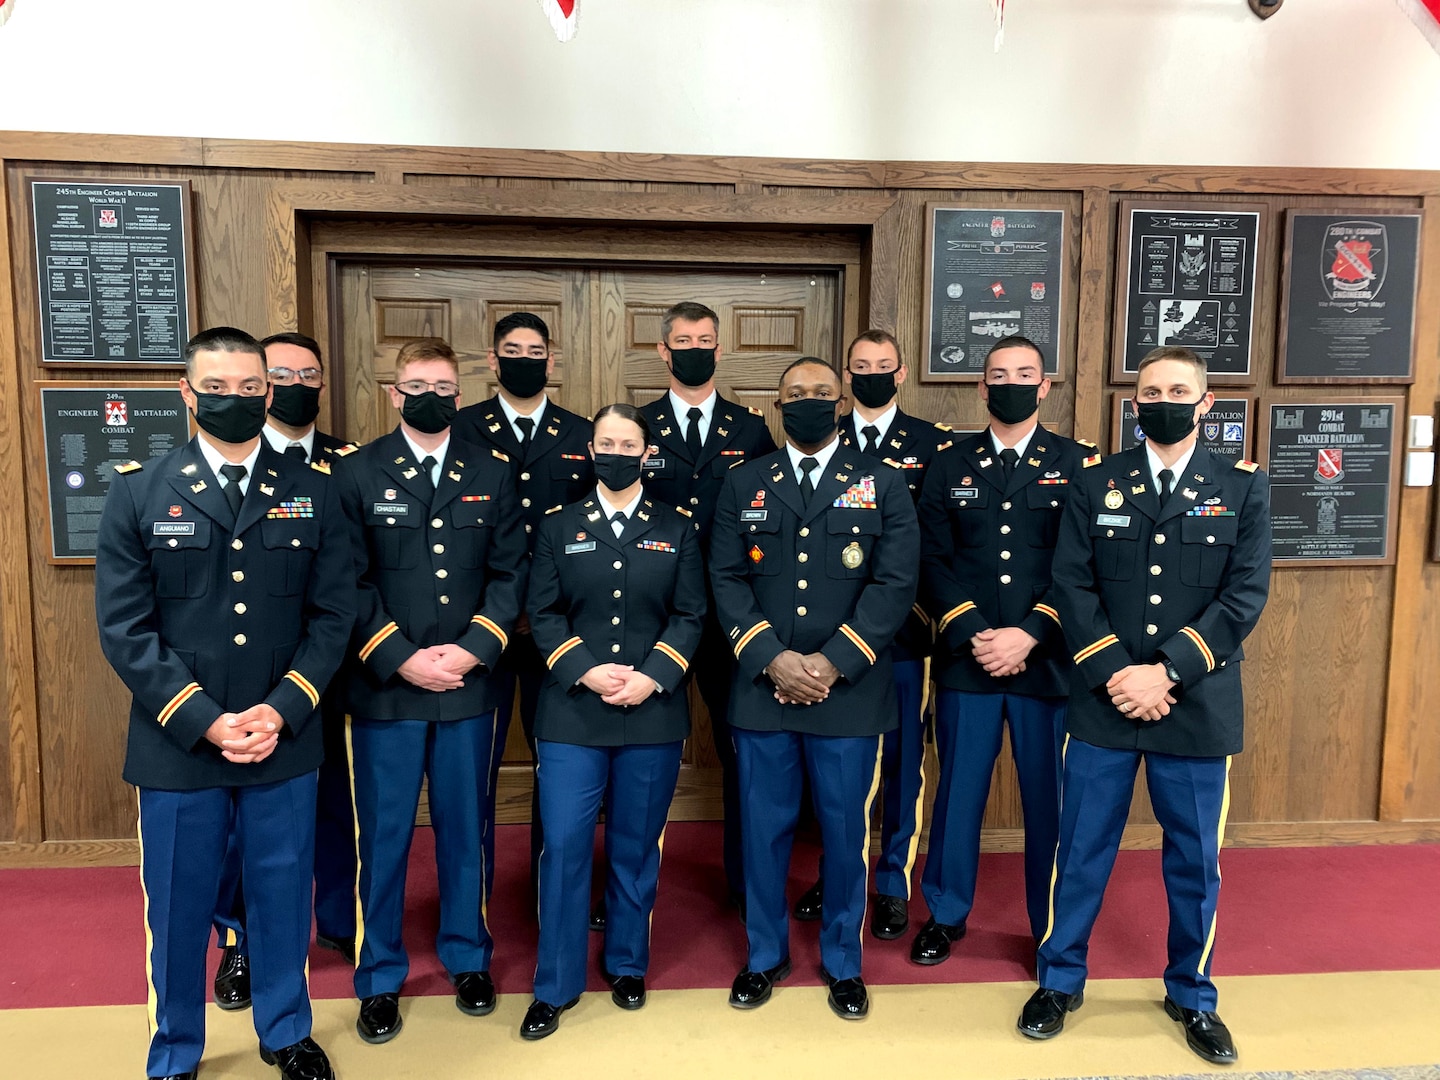 2nd Lt. Bennie Brown (fourth from right) stands with fellow engineer officer school graduates. Brown is the oldest African American officer and one of the oldest officers ever to graduate the engineer officer course at Fort Leonard Wood, Missouri. (photo illustration provided by 2nd Lt. Bennie Brown)